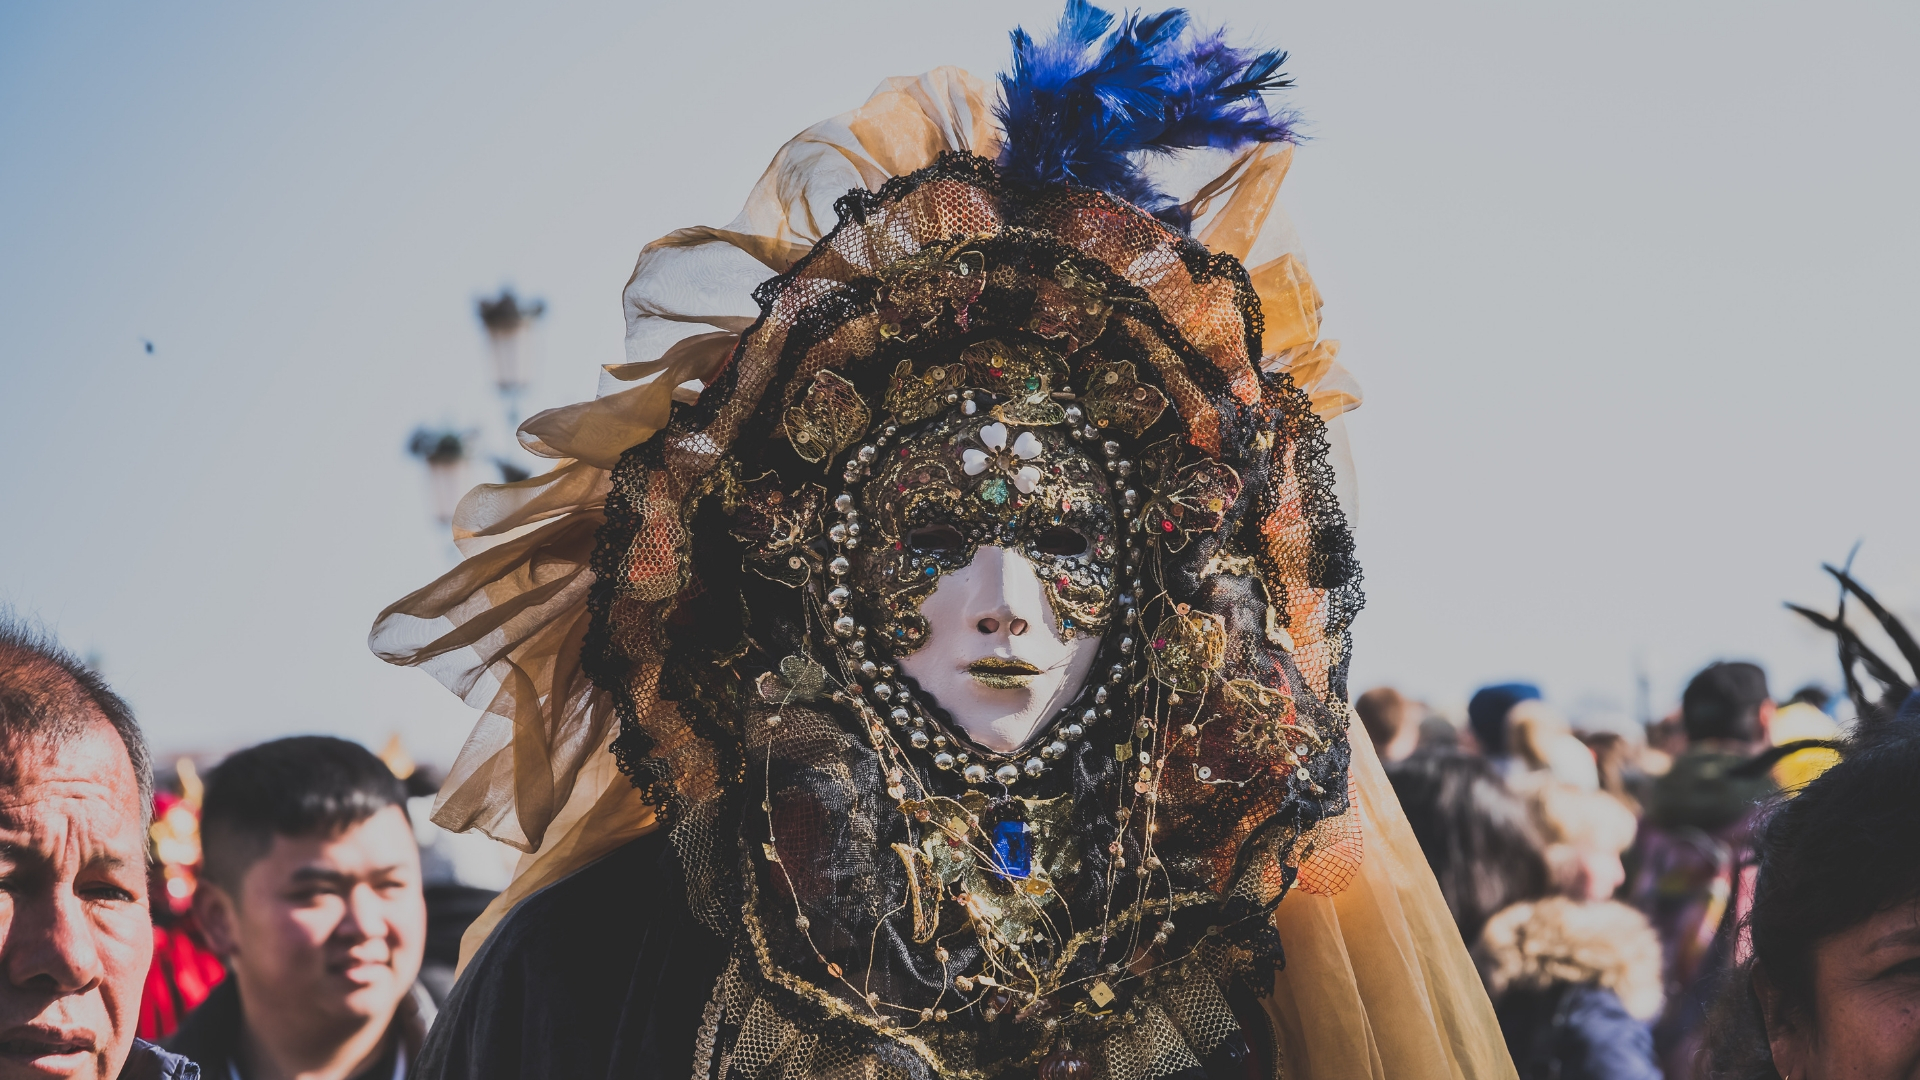 The Venice Carnival Between Tradition and Modernity